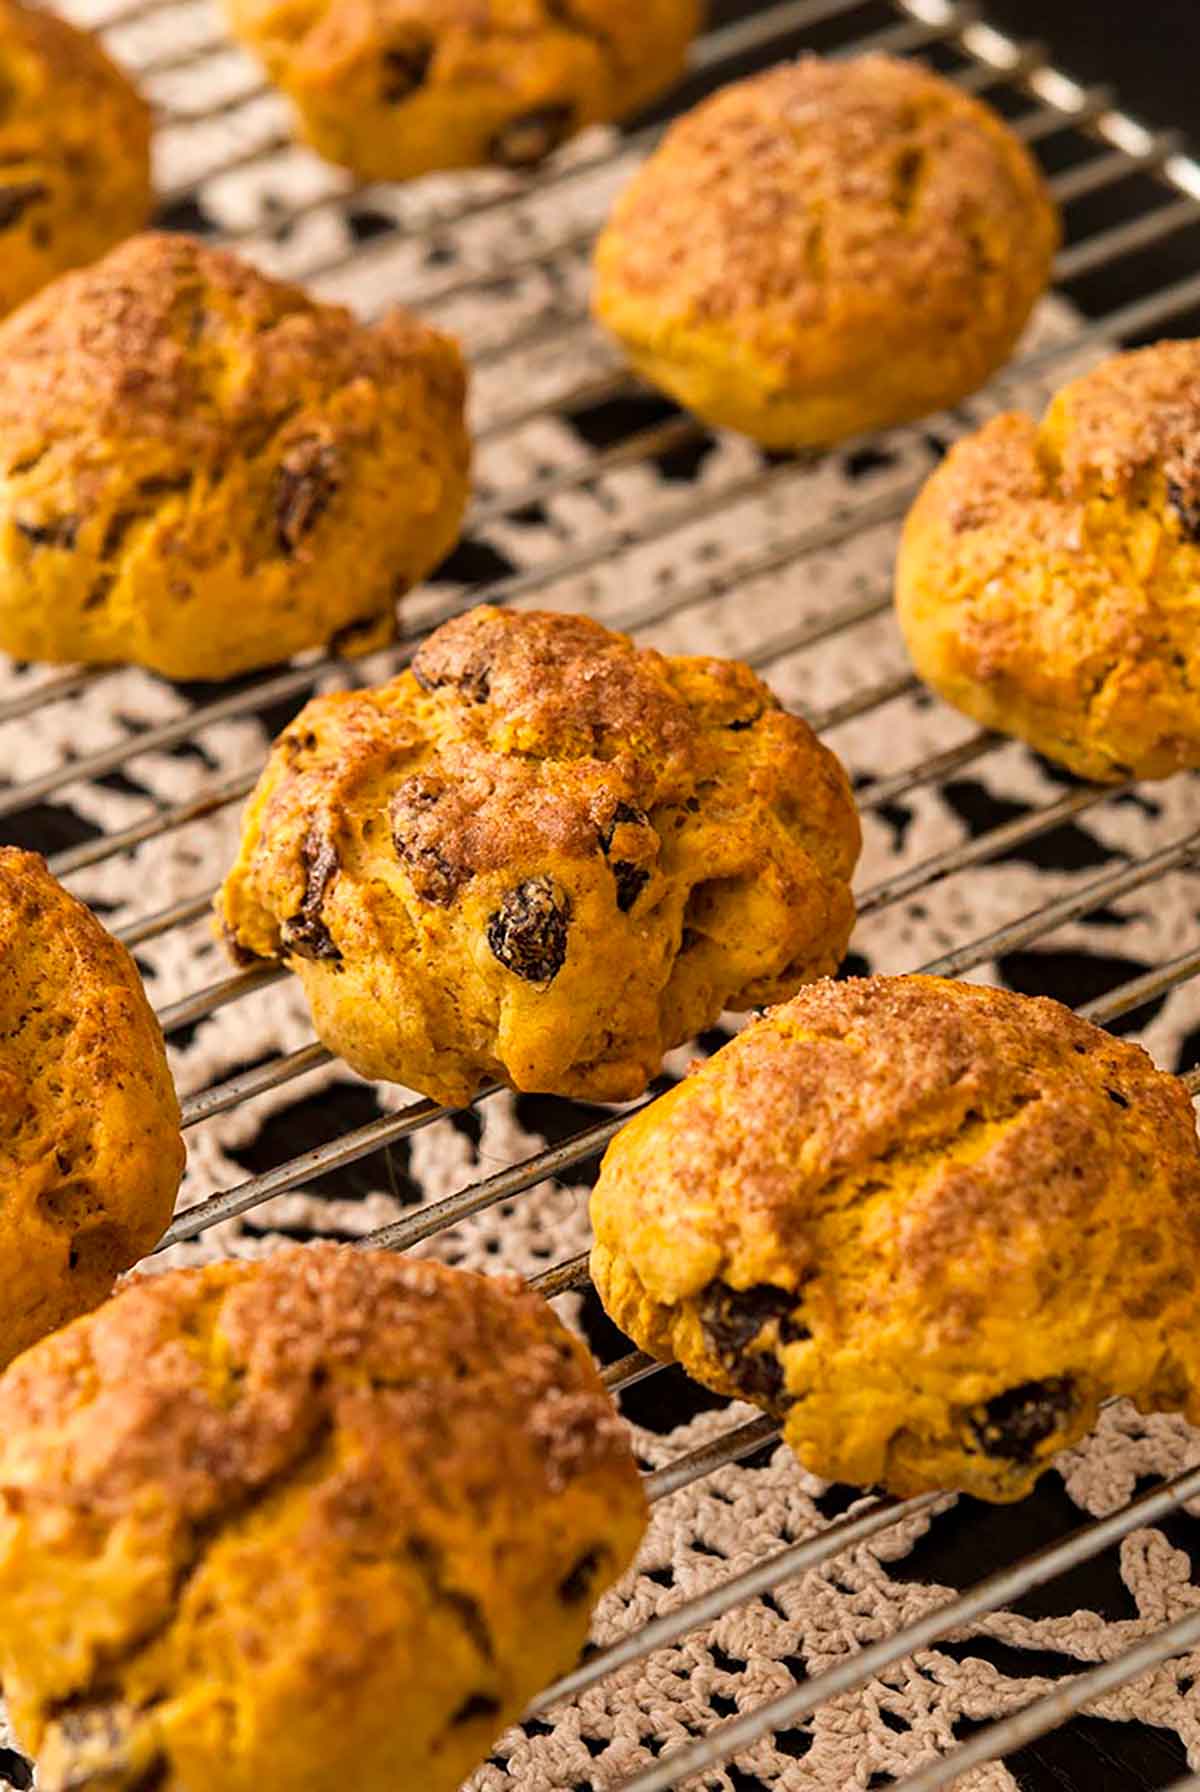 Pumpkin scones cooling on a wrack over a lace tablecloth.